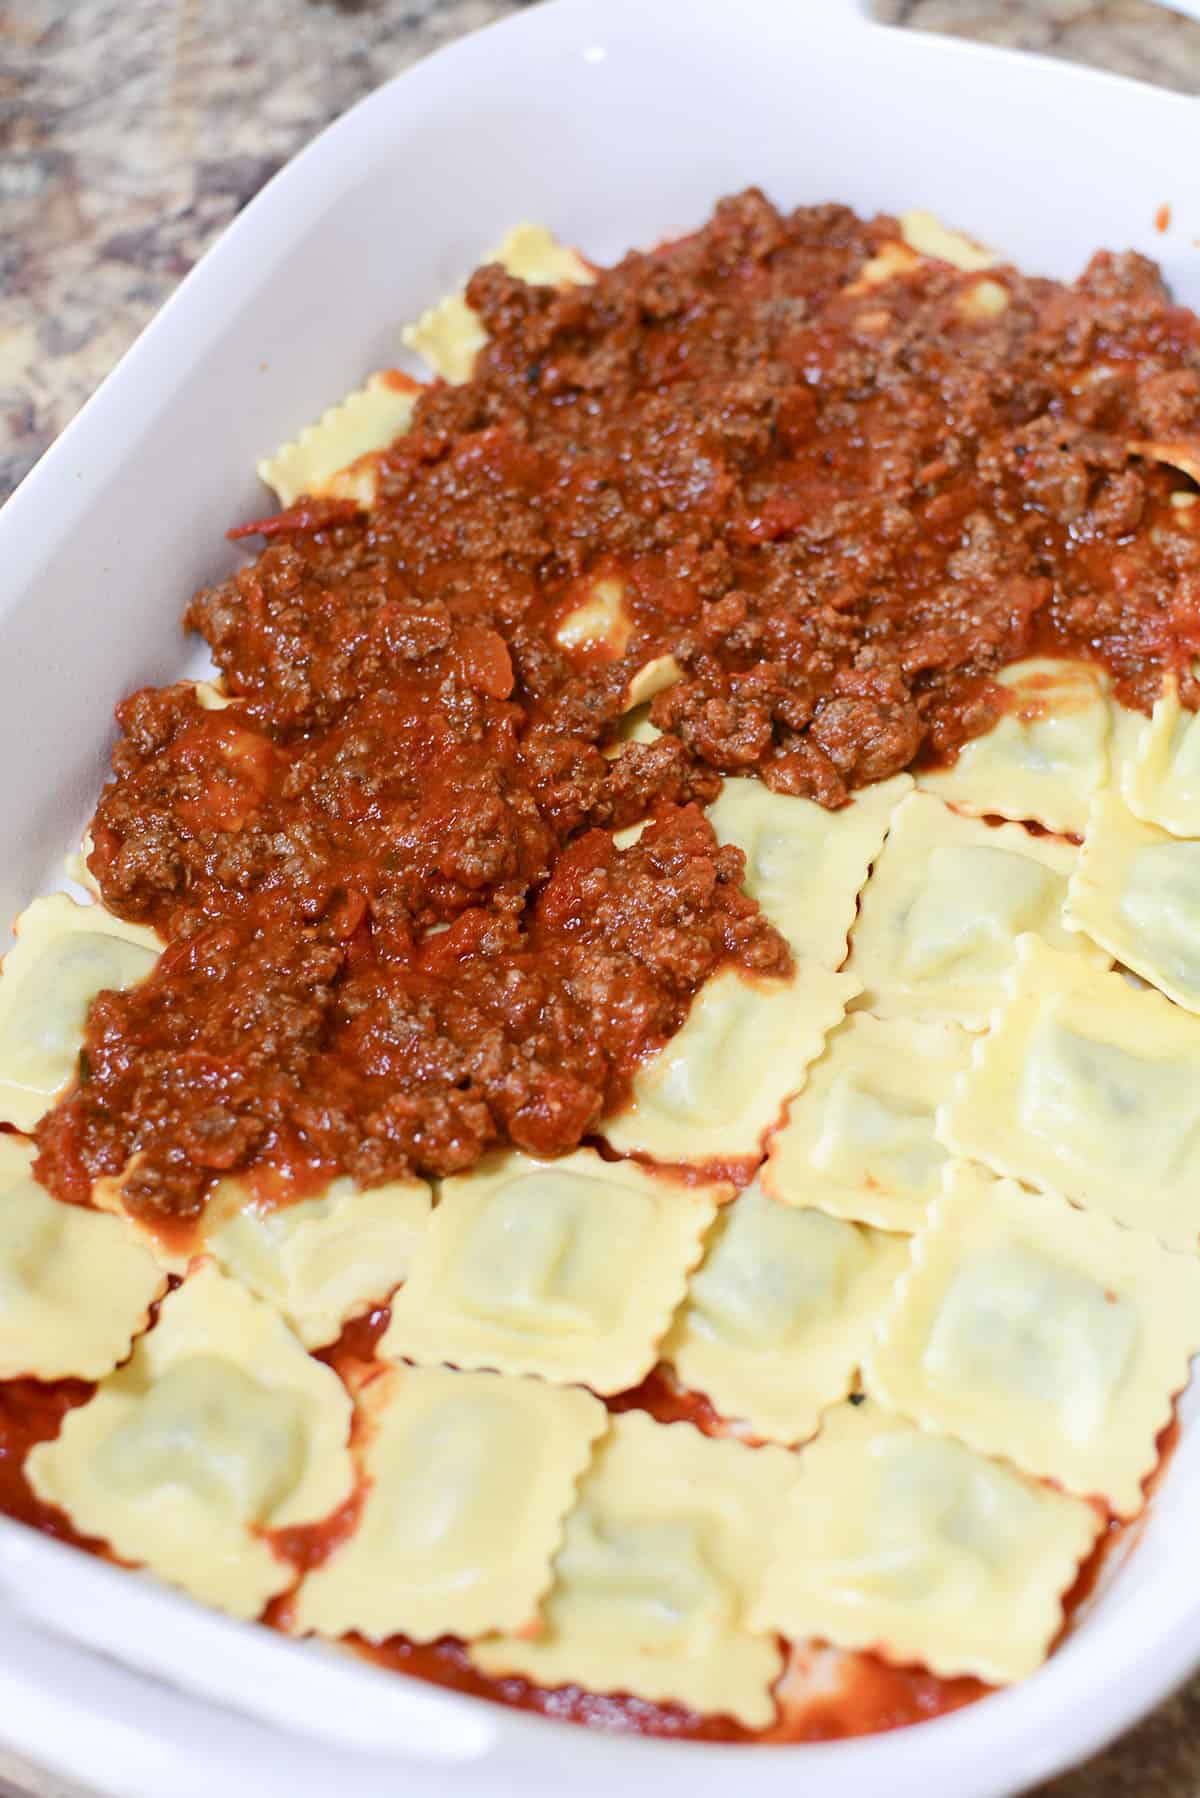 The layering of the lazy lasagna shown.